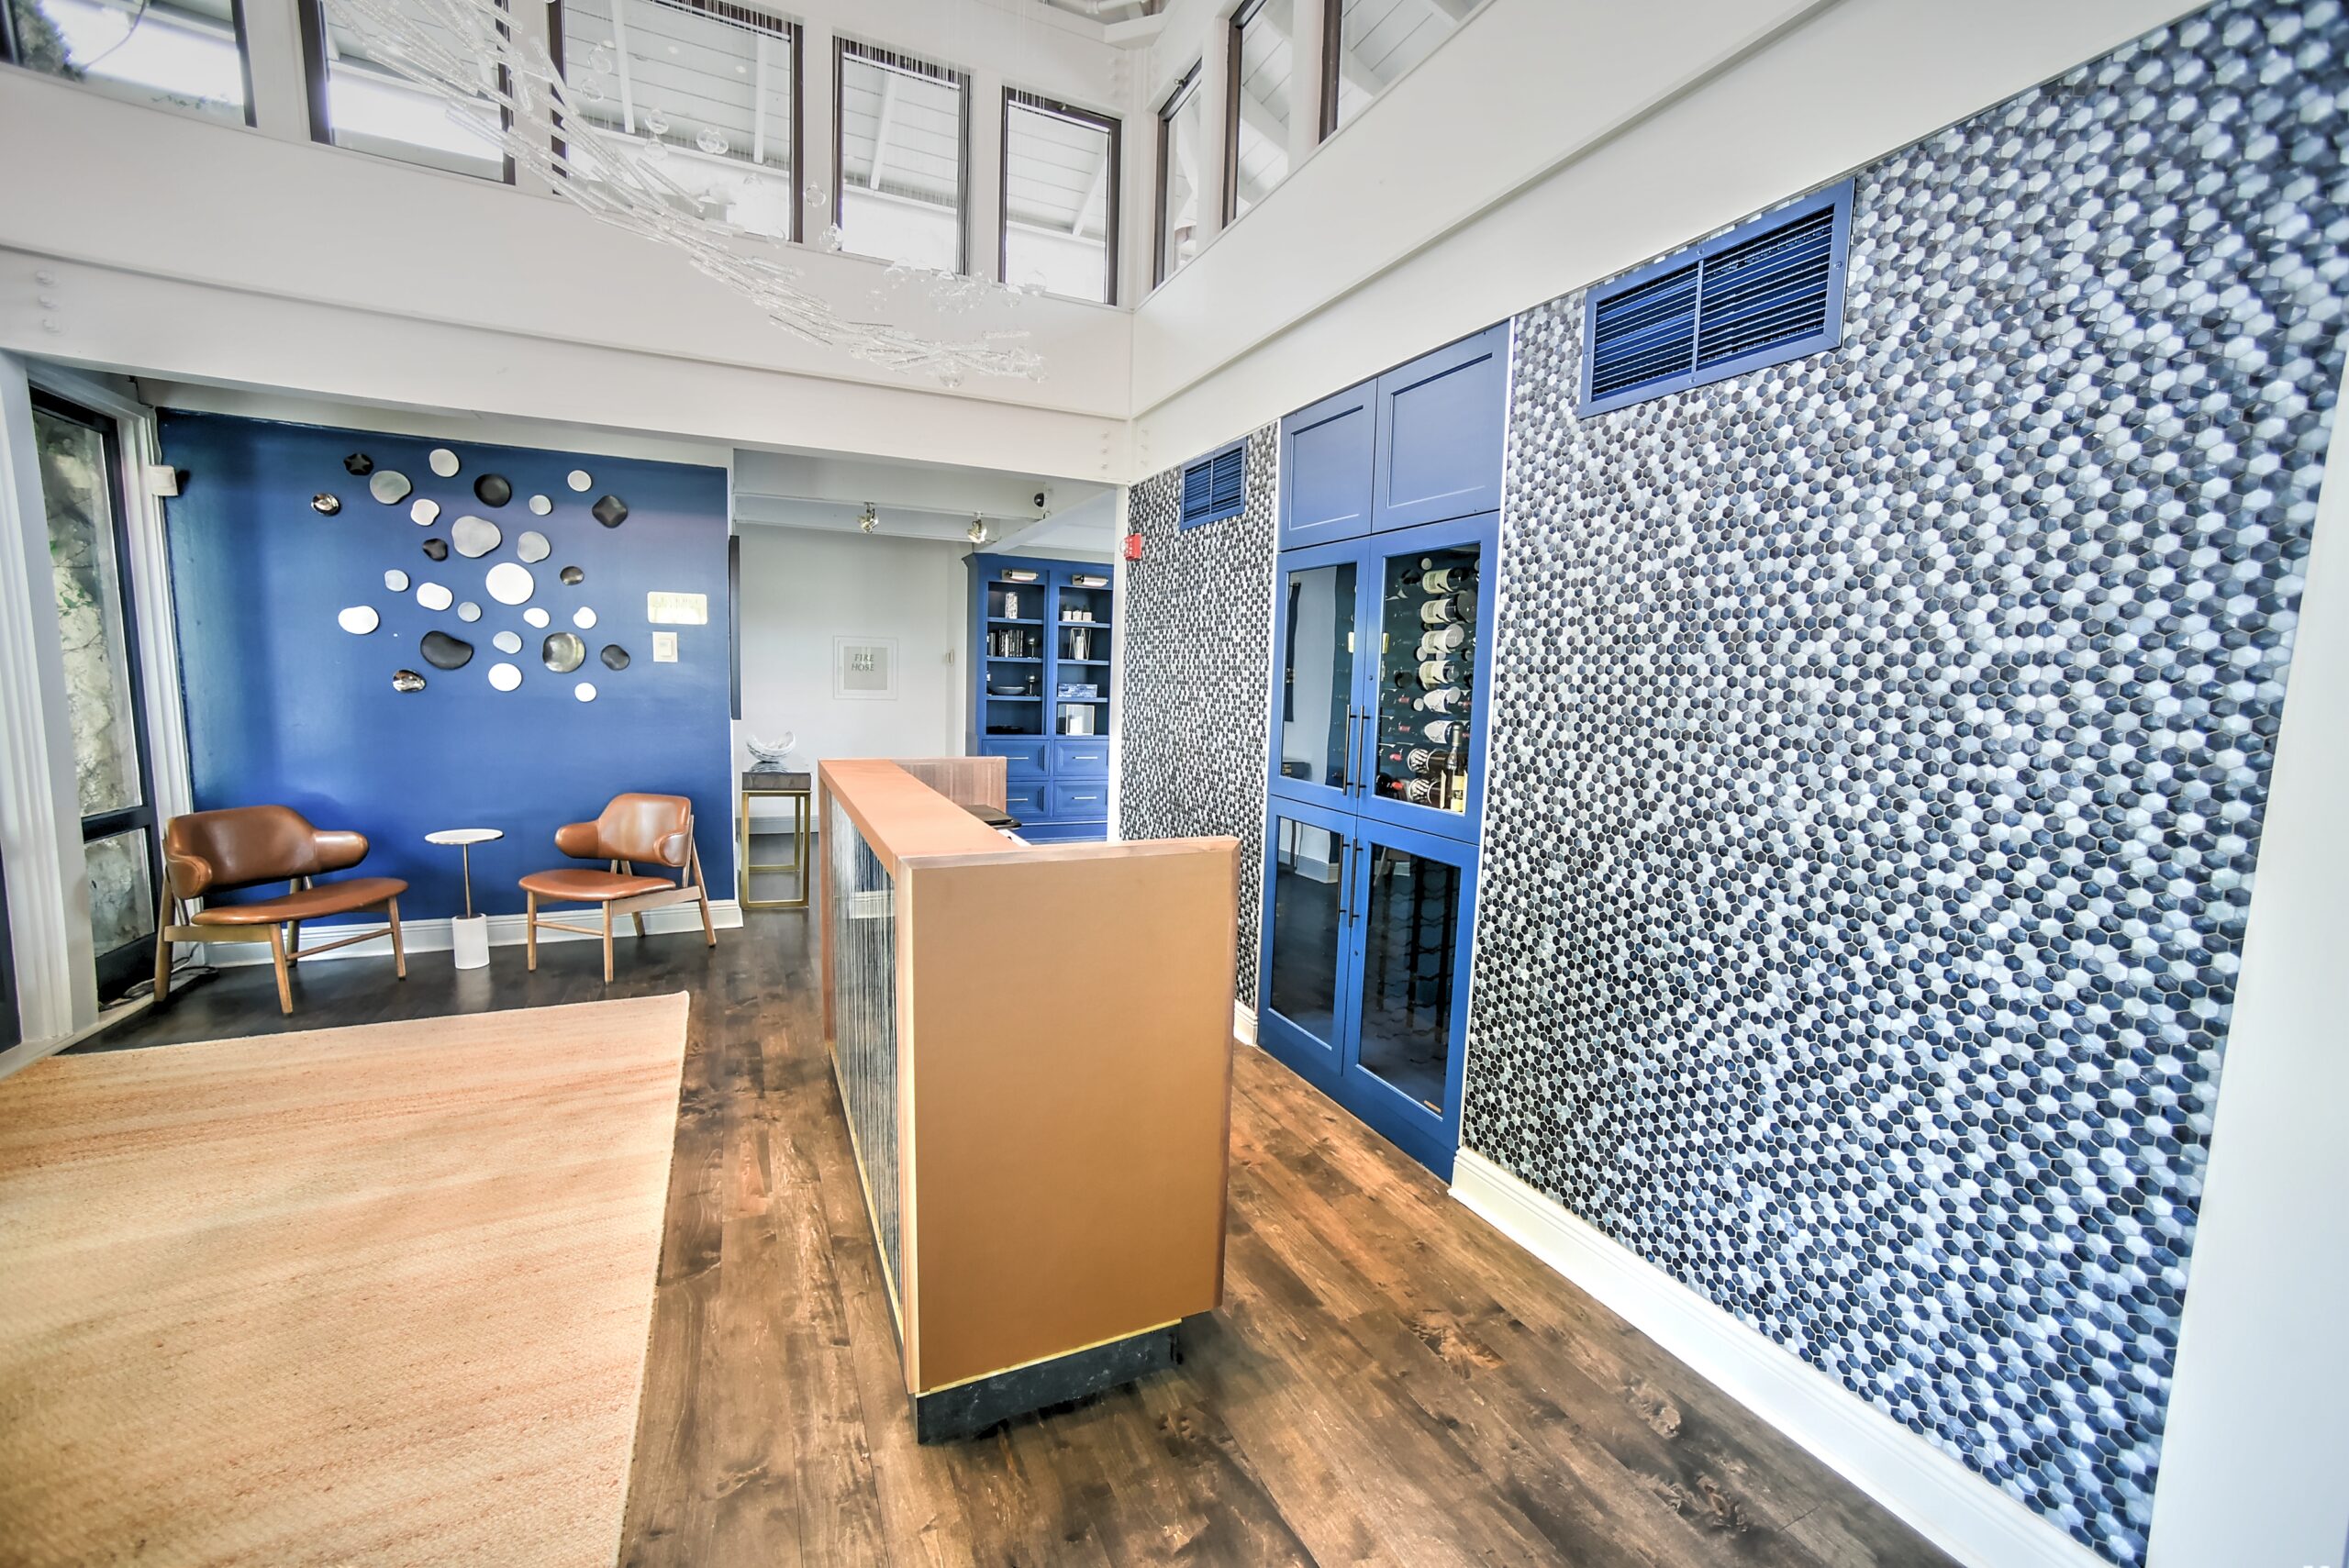 This image shows a hotel that Riken Construction remodeled. There is brand-new wooden floors, a new desk for hosting, and brand new tile/backsplash to accent their blue walls.